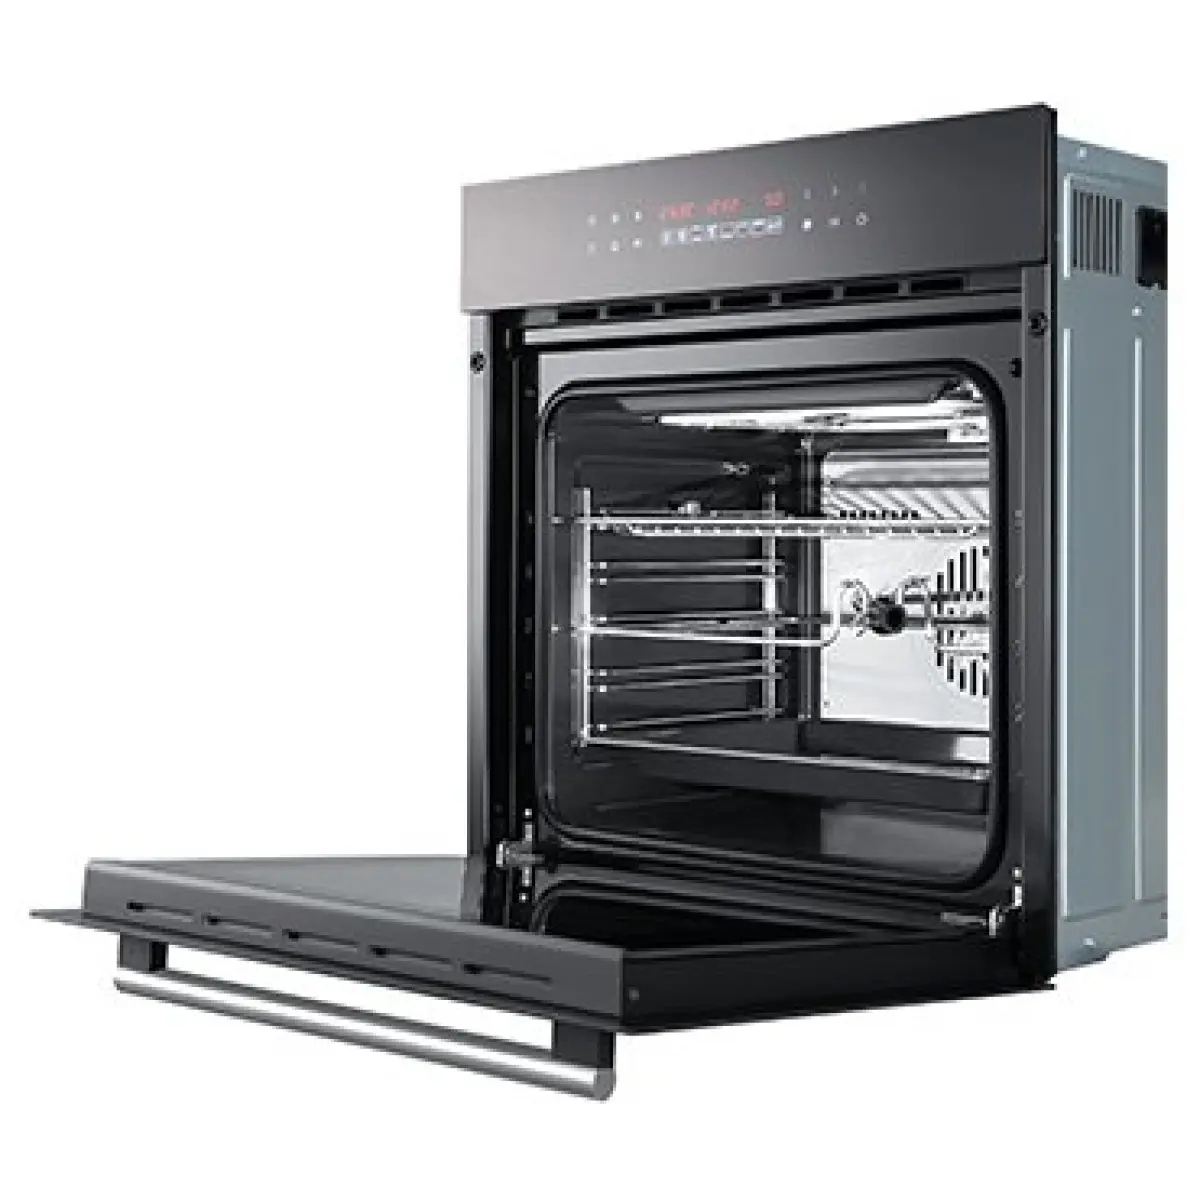 OVEN KQWS-2800-R312 (VBA521)